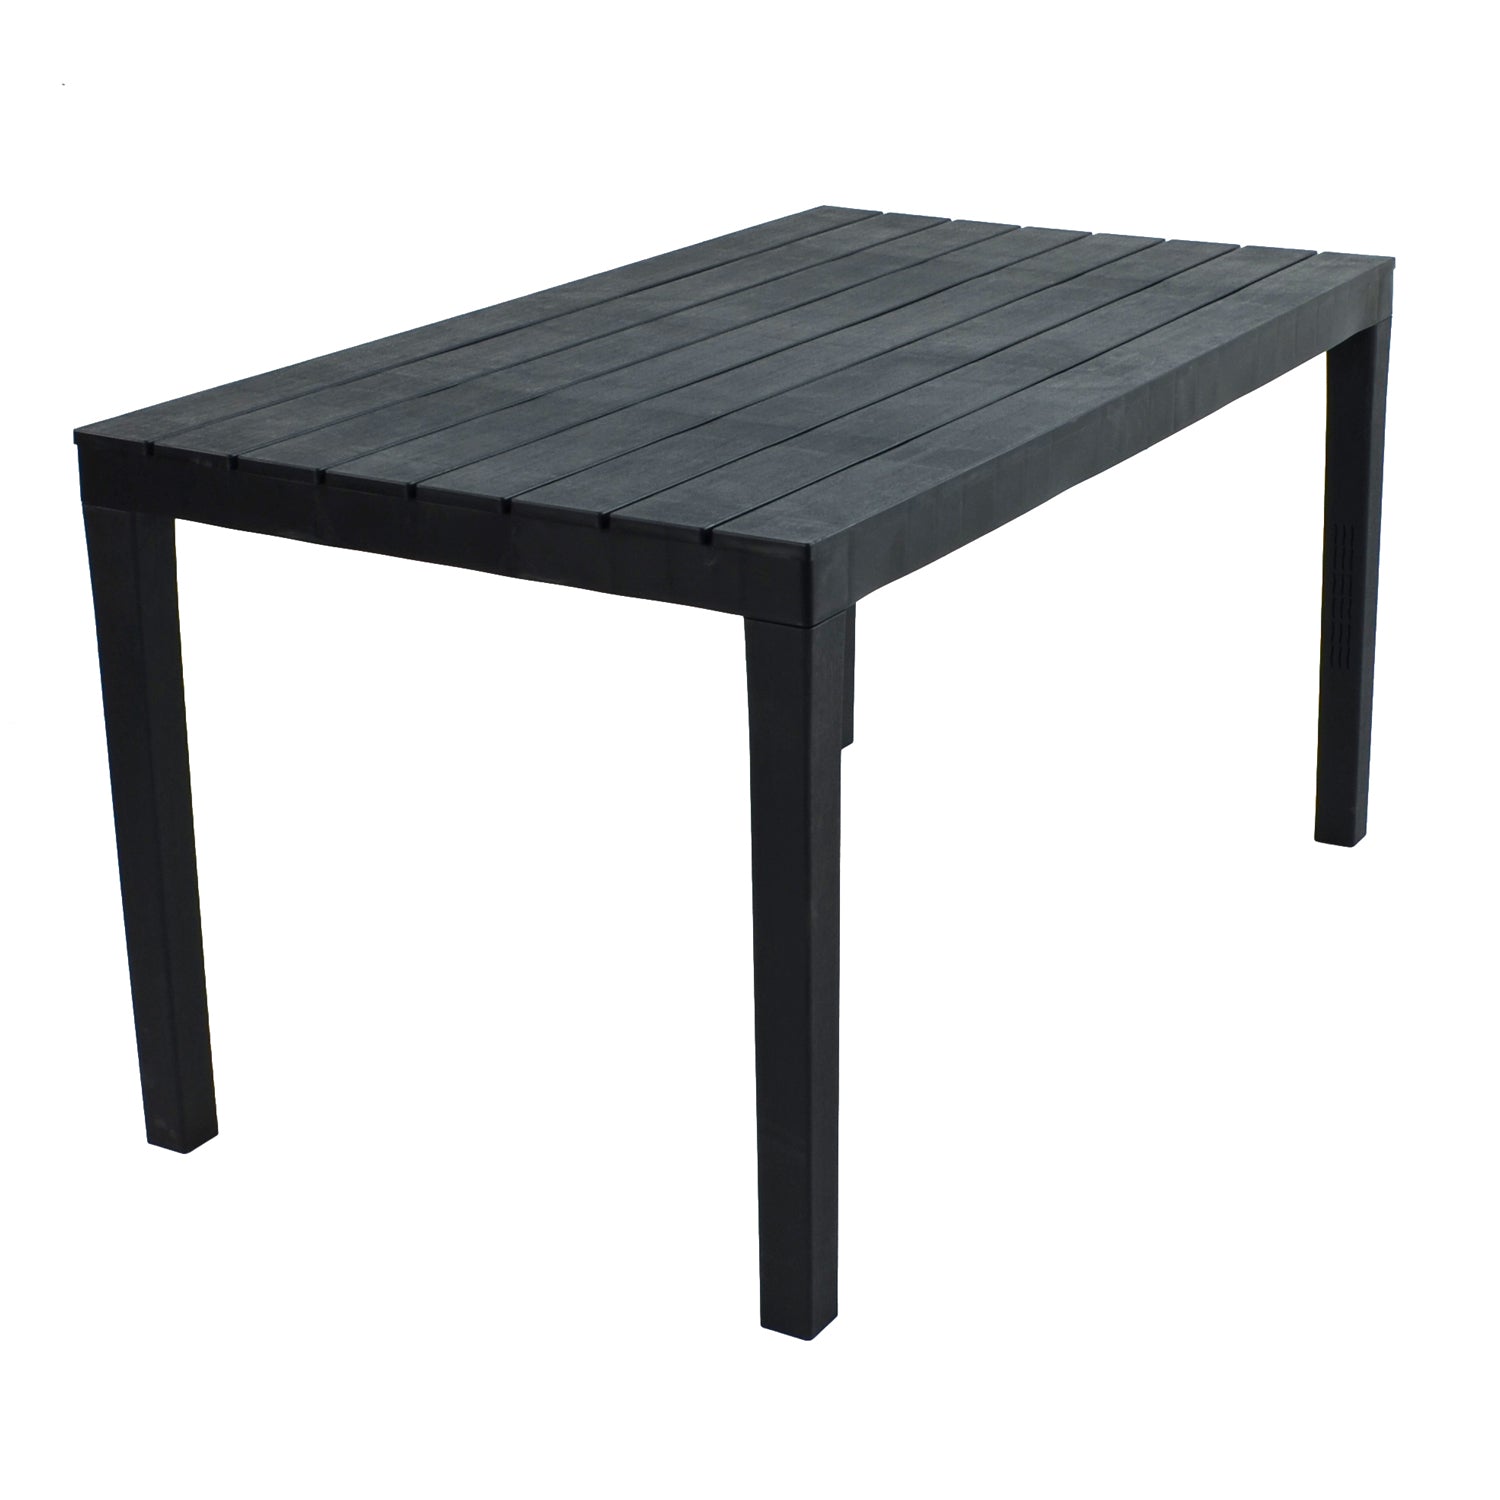 Trabella Roma Rectangular Table in Anthracite Tables Trabella   